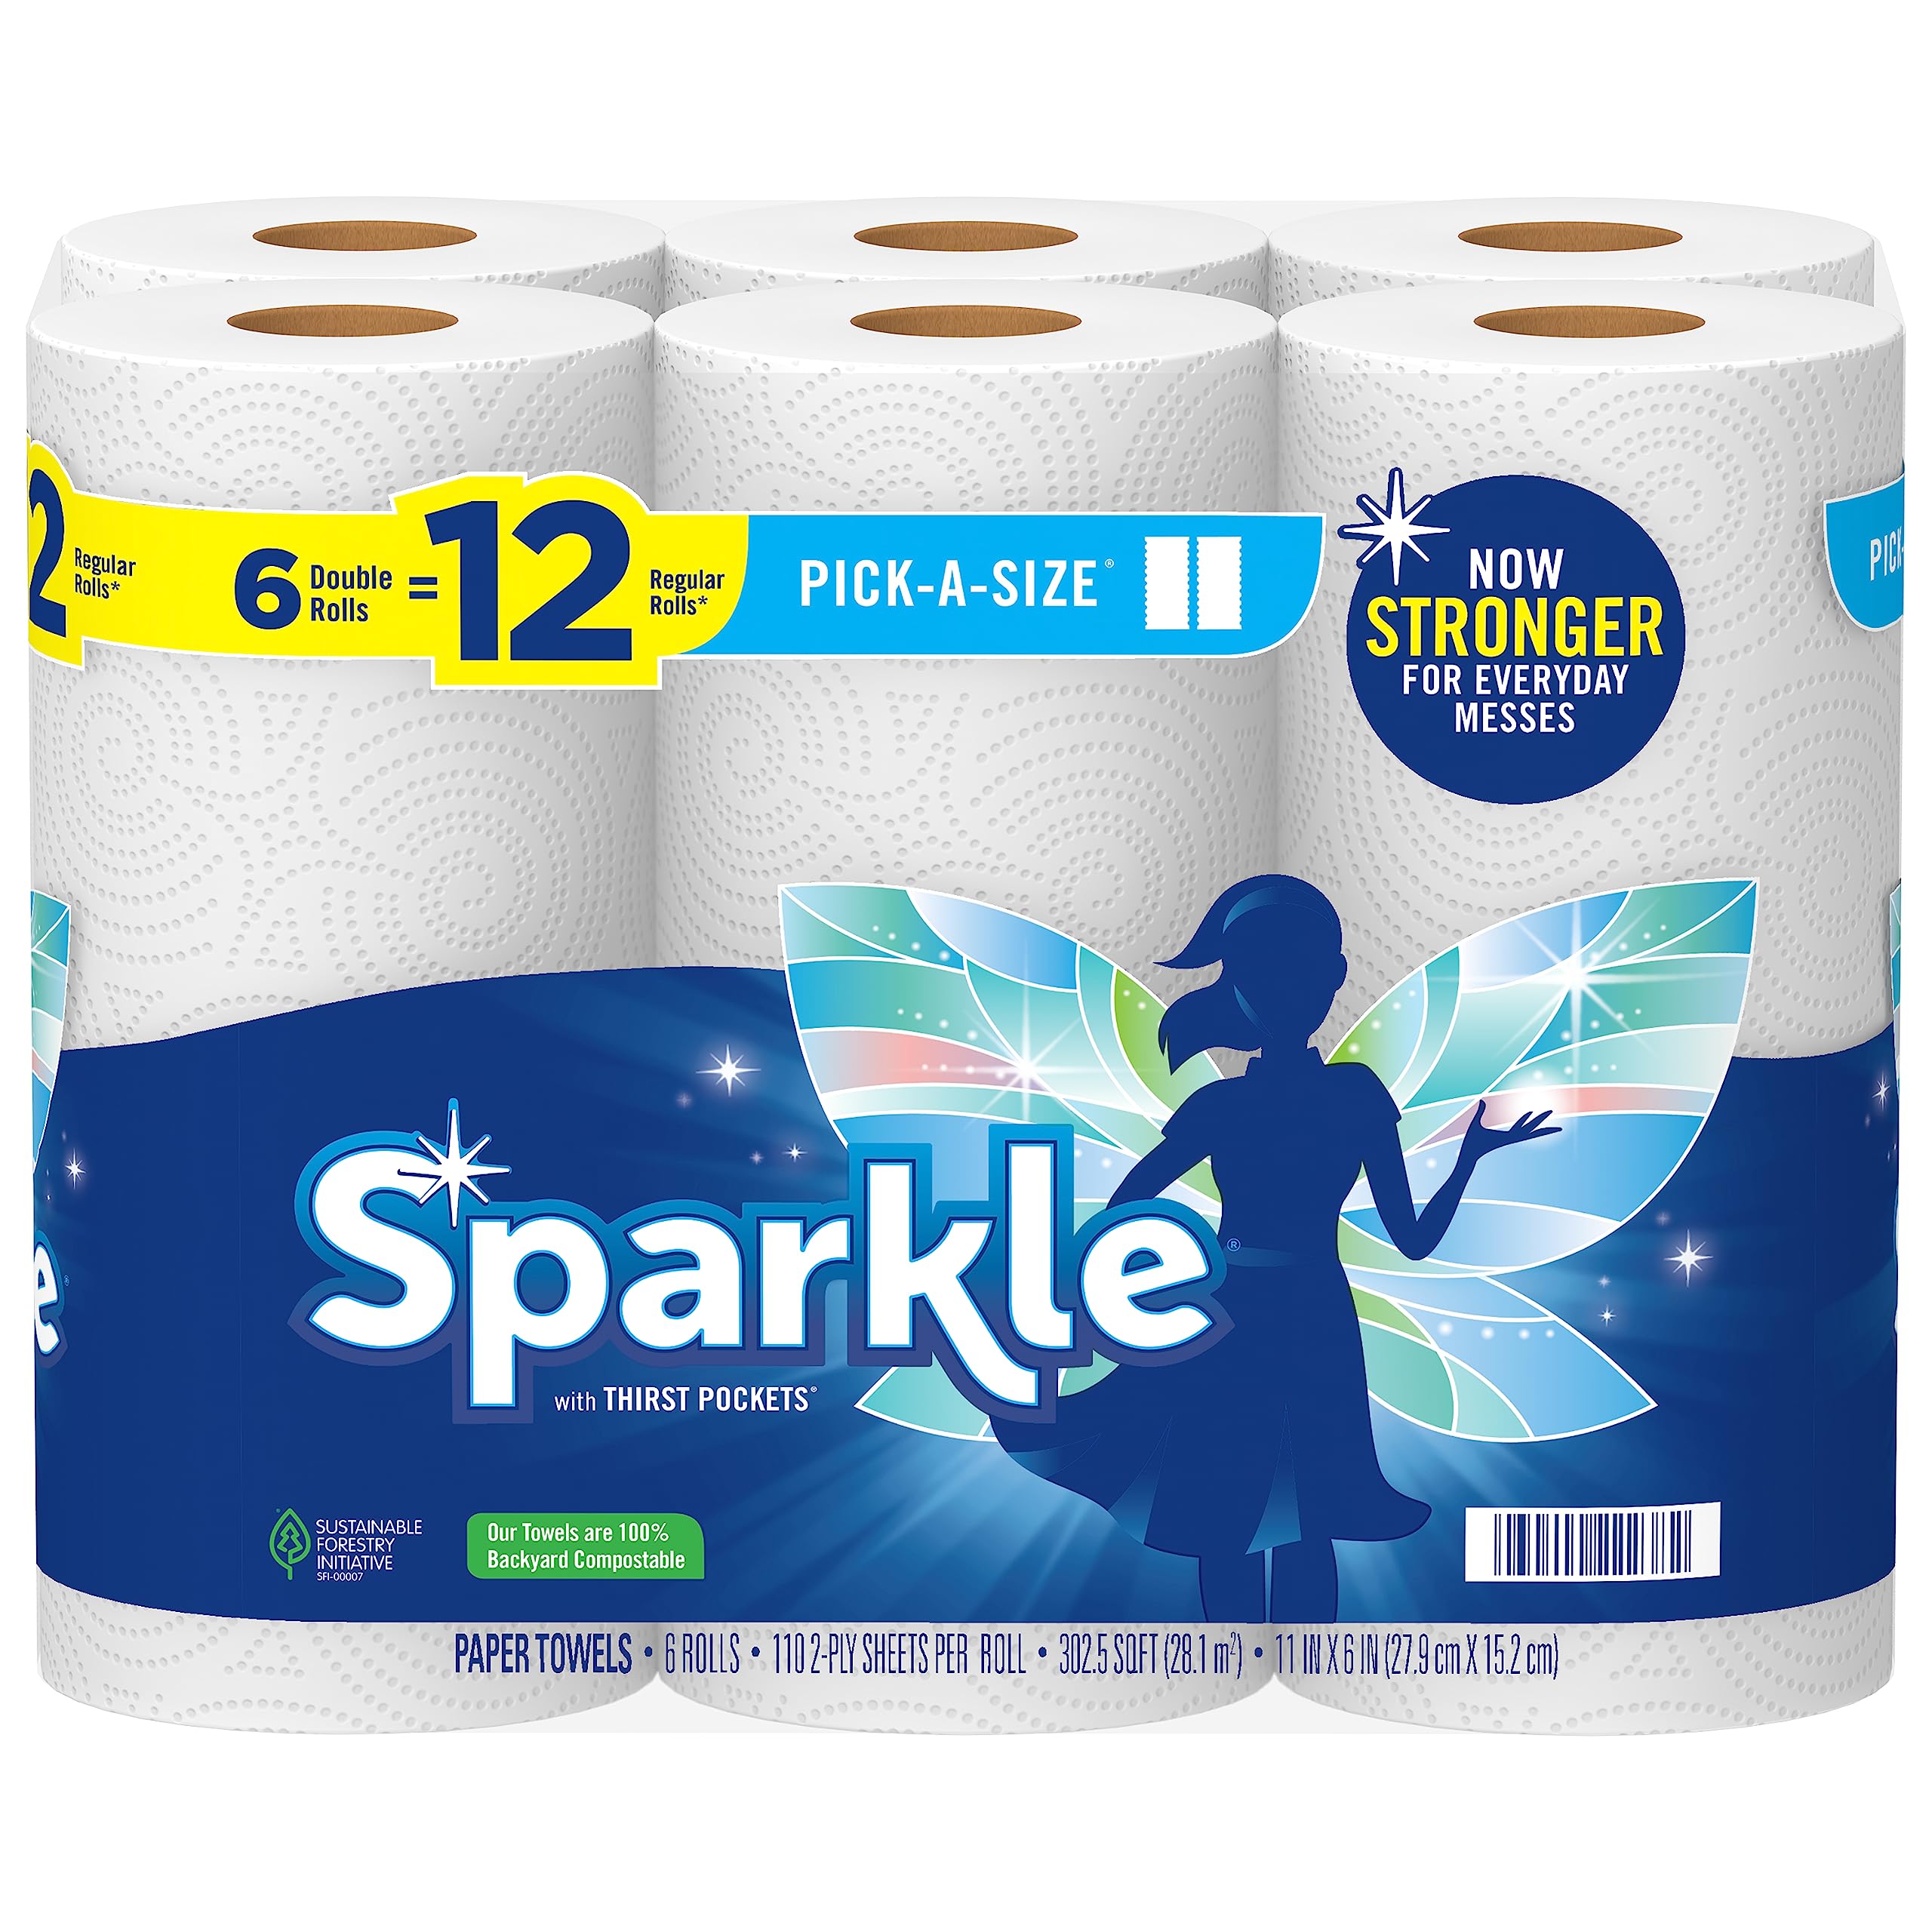 6-Count Sparkle Pick-A-Size 2-Ply Double Roll Paper Towels $6.76 w/ S&S + Free Shipping w/ Prime or on orders $35+